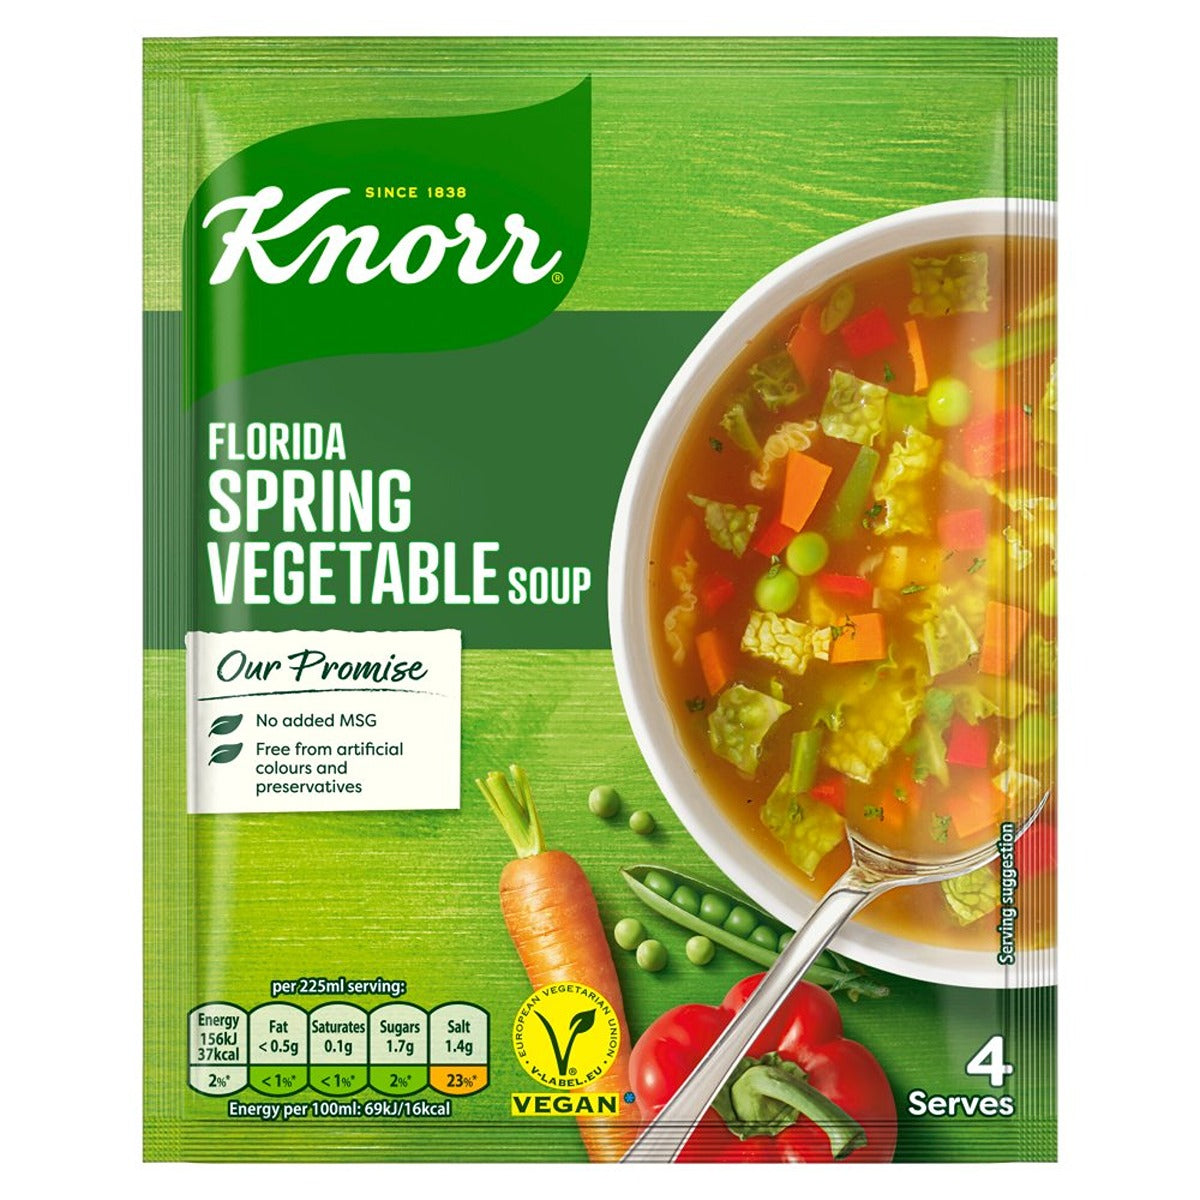 Knorr - Florida Spring Vegetable Dry Packet Soup - 48g brand of soup.